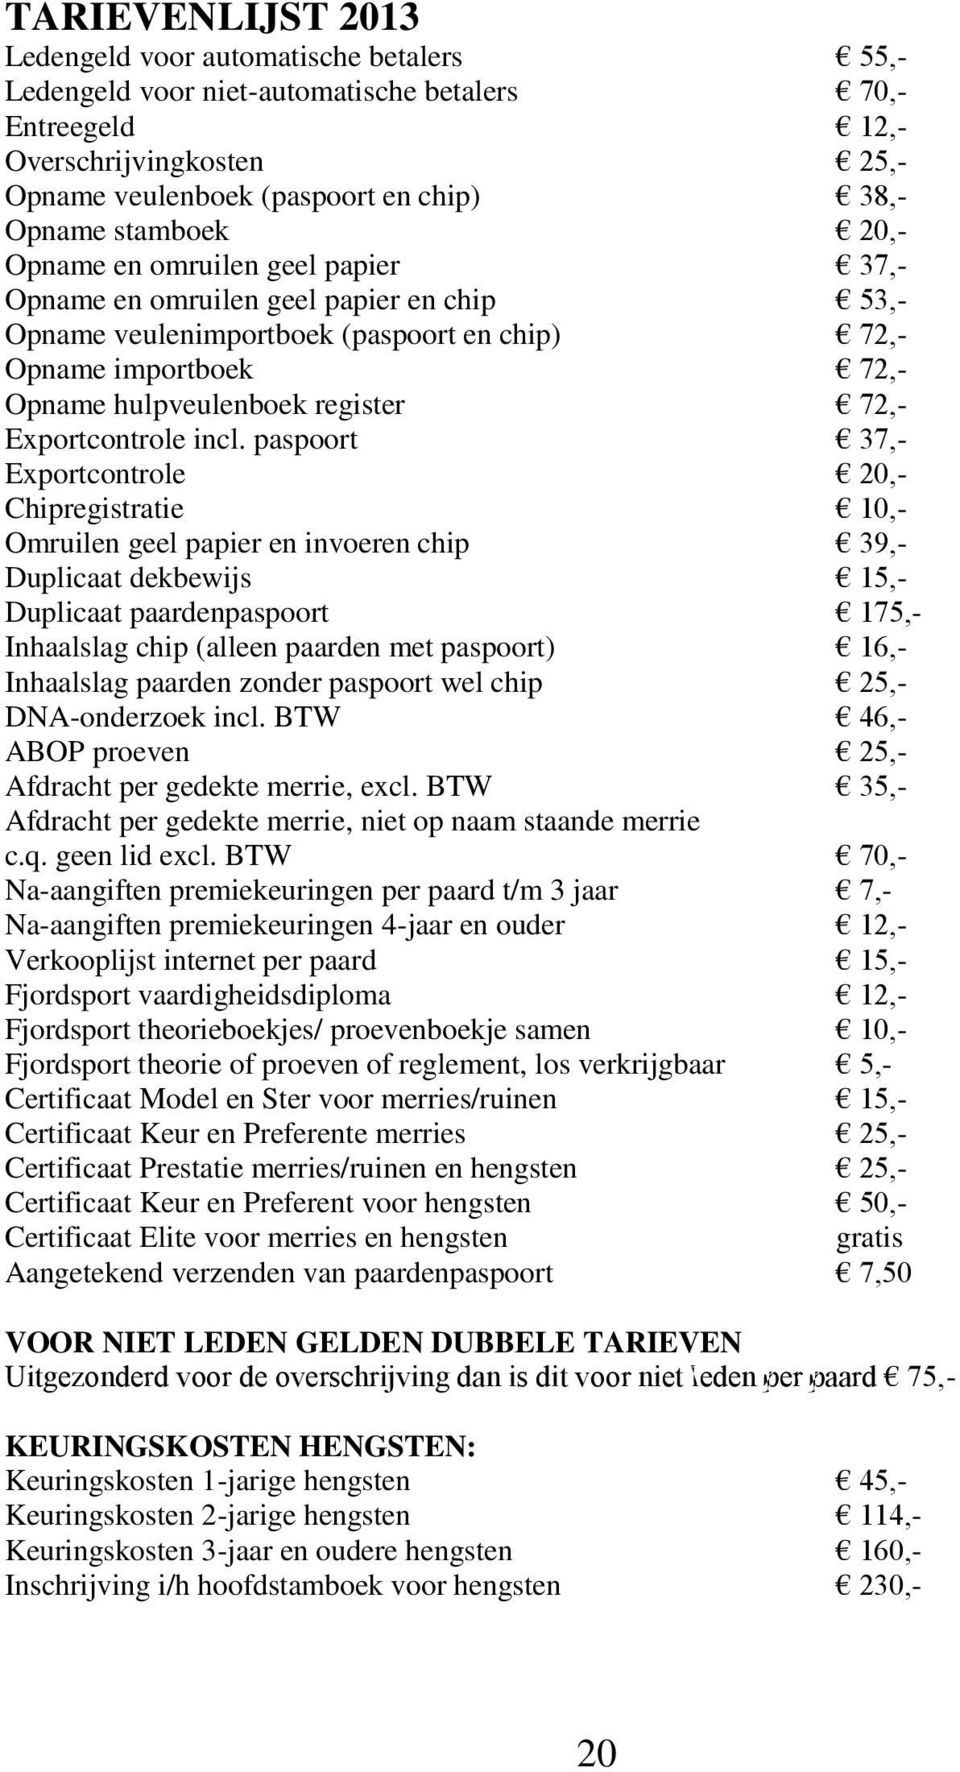 72,- Exportcontrole incl.